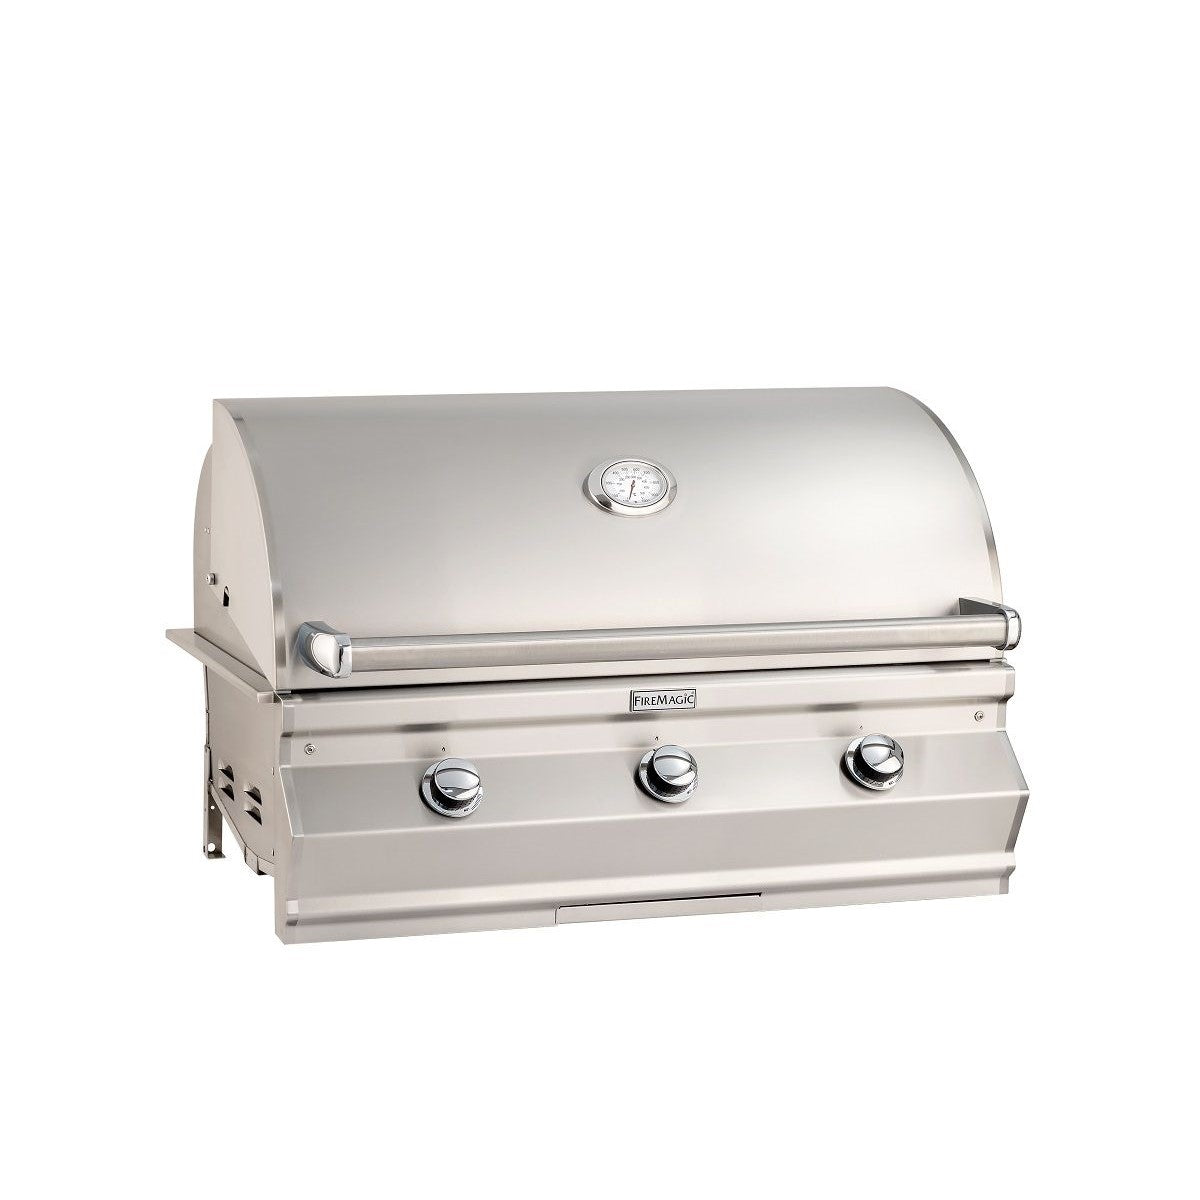 Fire Magic Choice 36" Built-In Grill with Analog Thermometer C650i